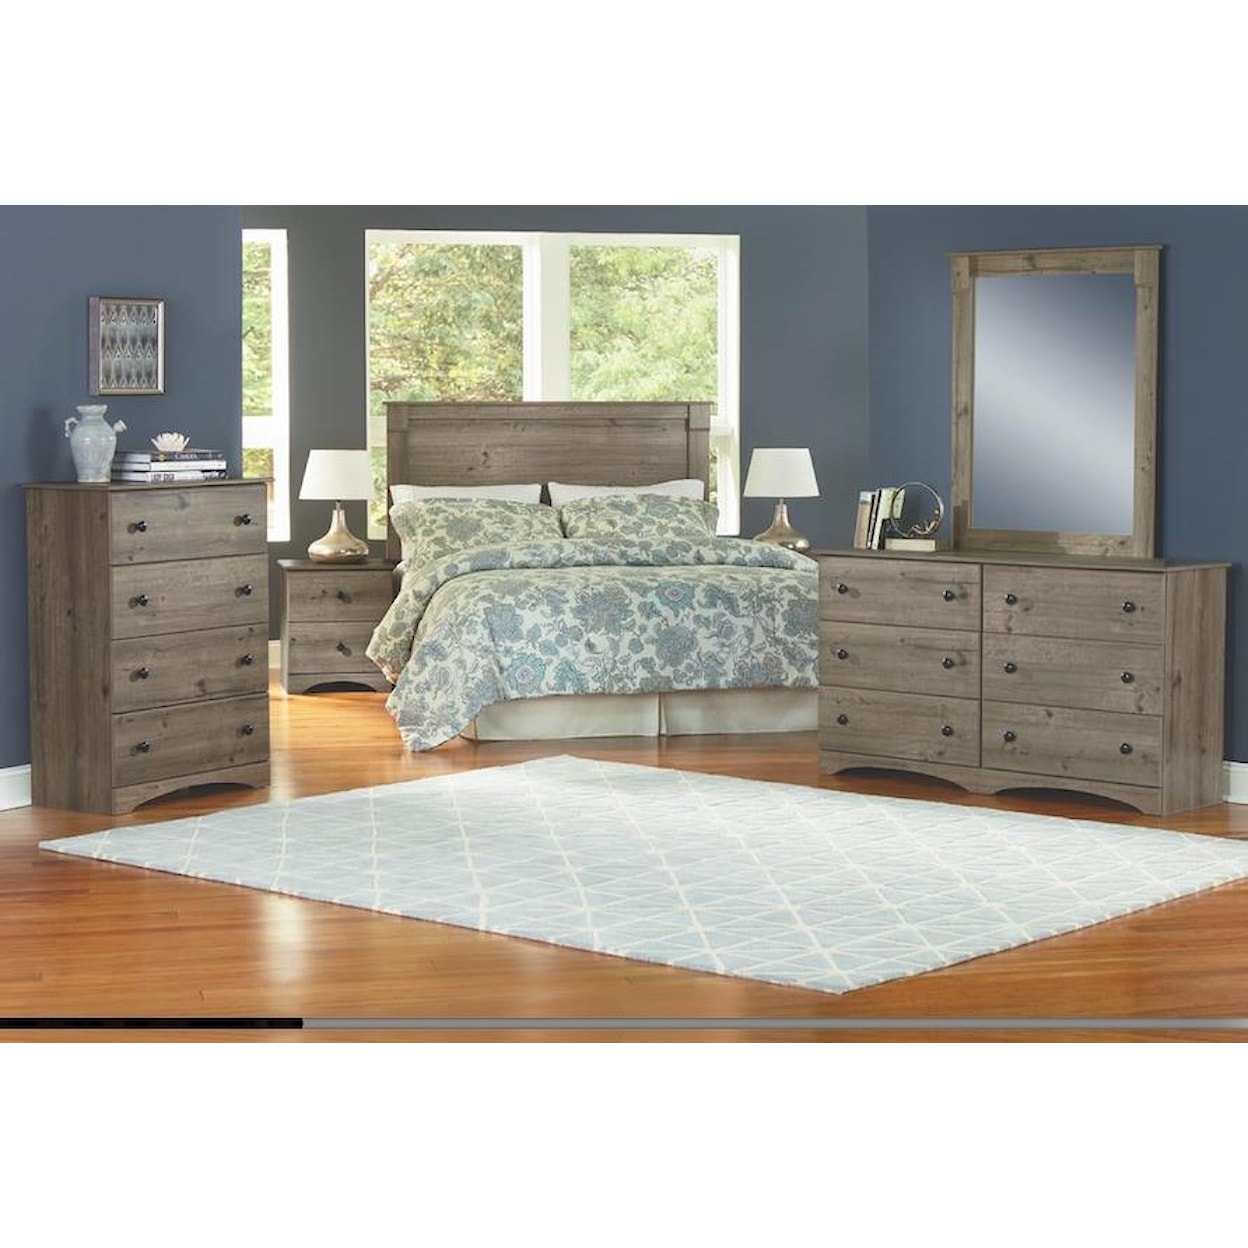 Perdue 13000 Series 32" 4 Drawer Chest